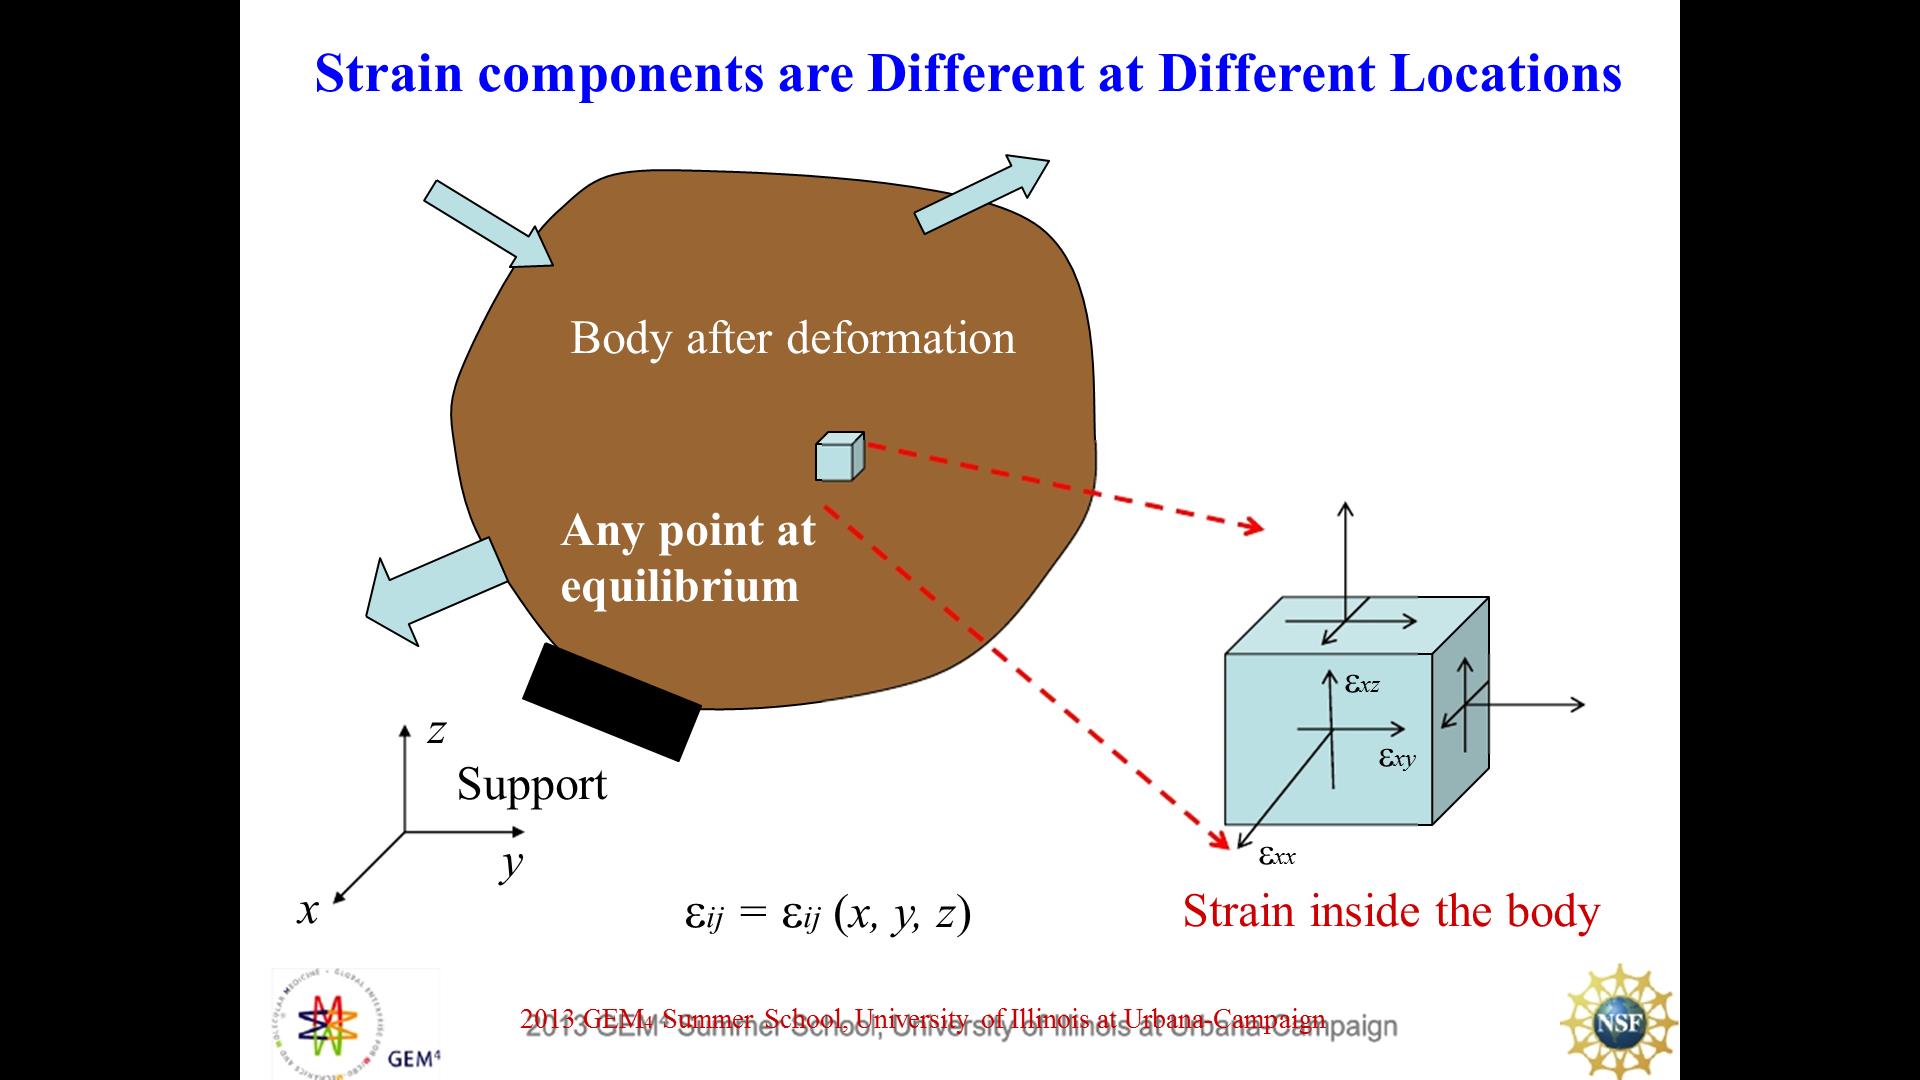 Strain components are Different at Different Locations